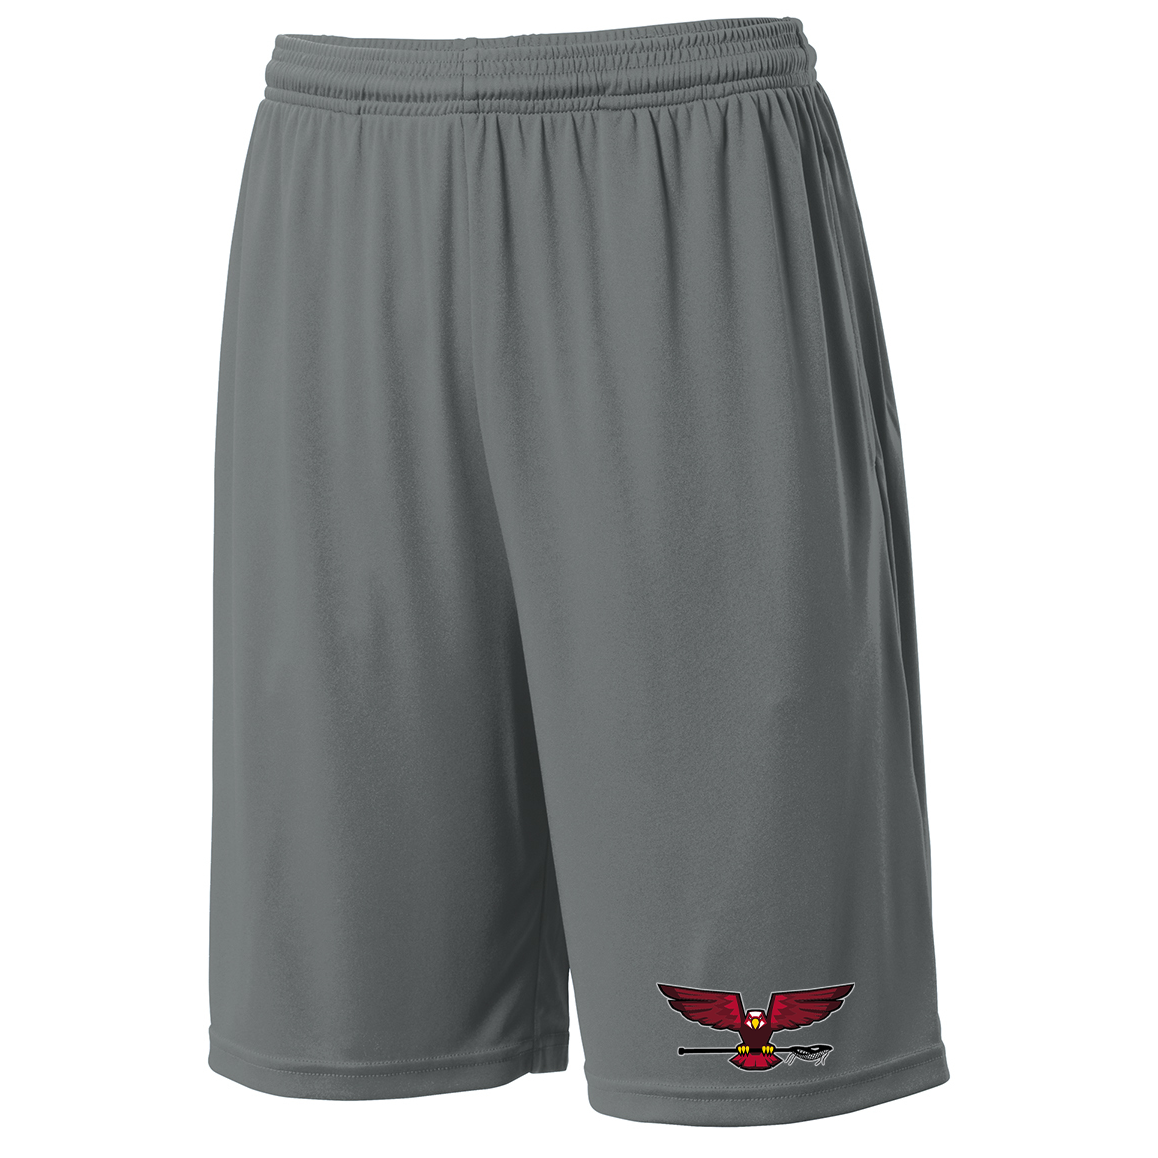 North Tapps Legacy Lacrosse Shorts